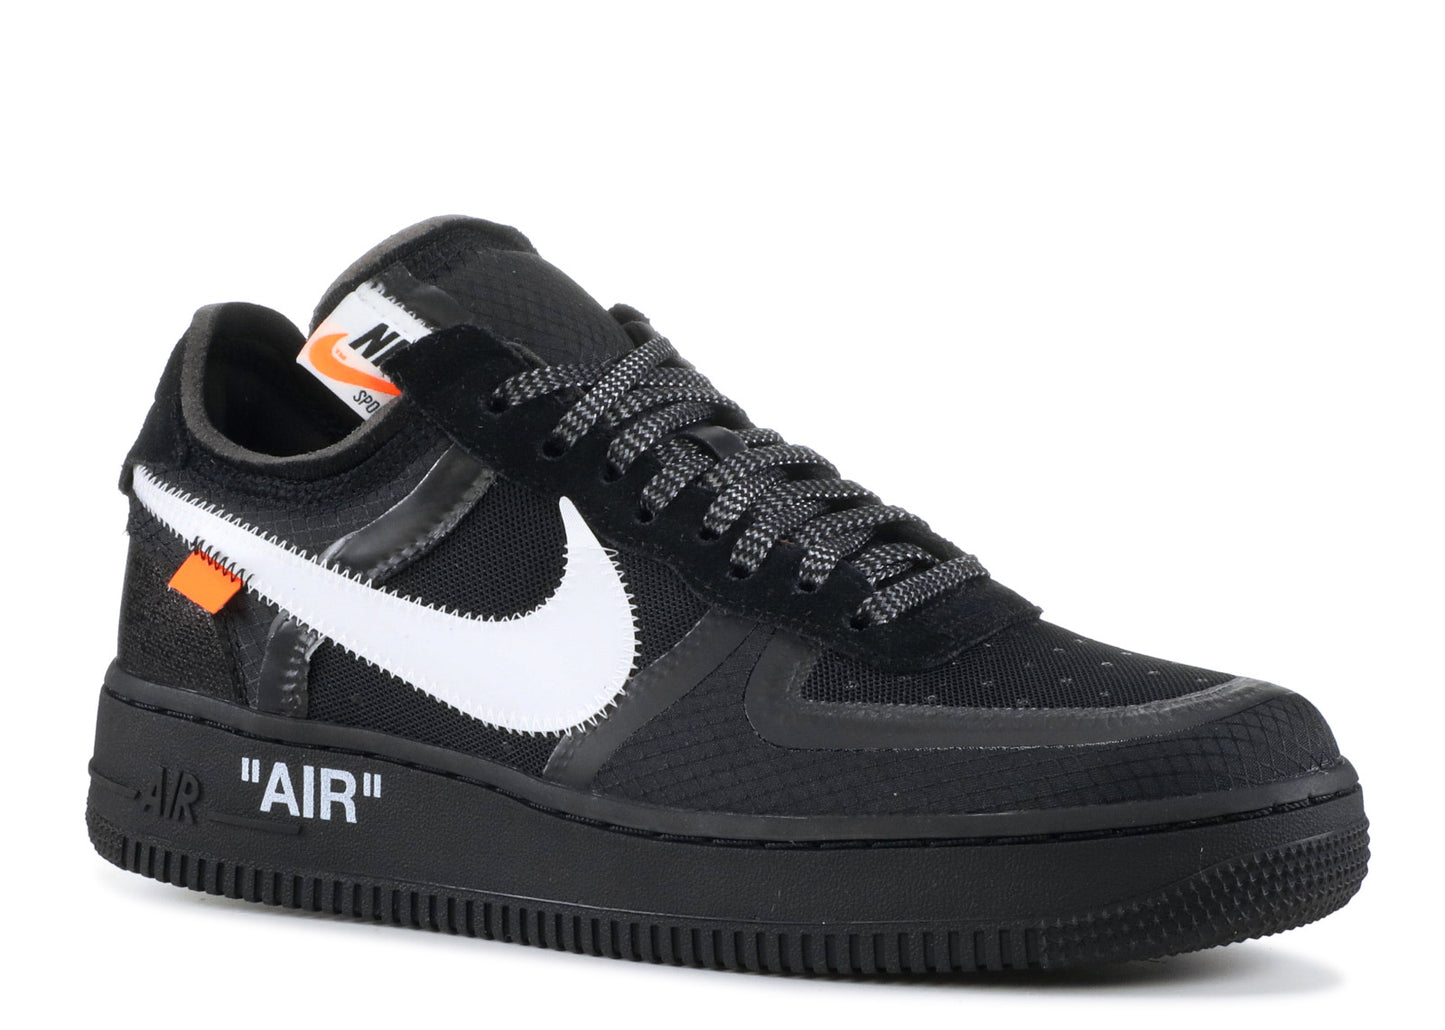 Off White x Nike Air Force 1 Low "Black"